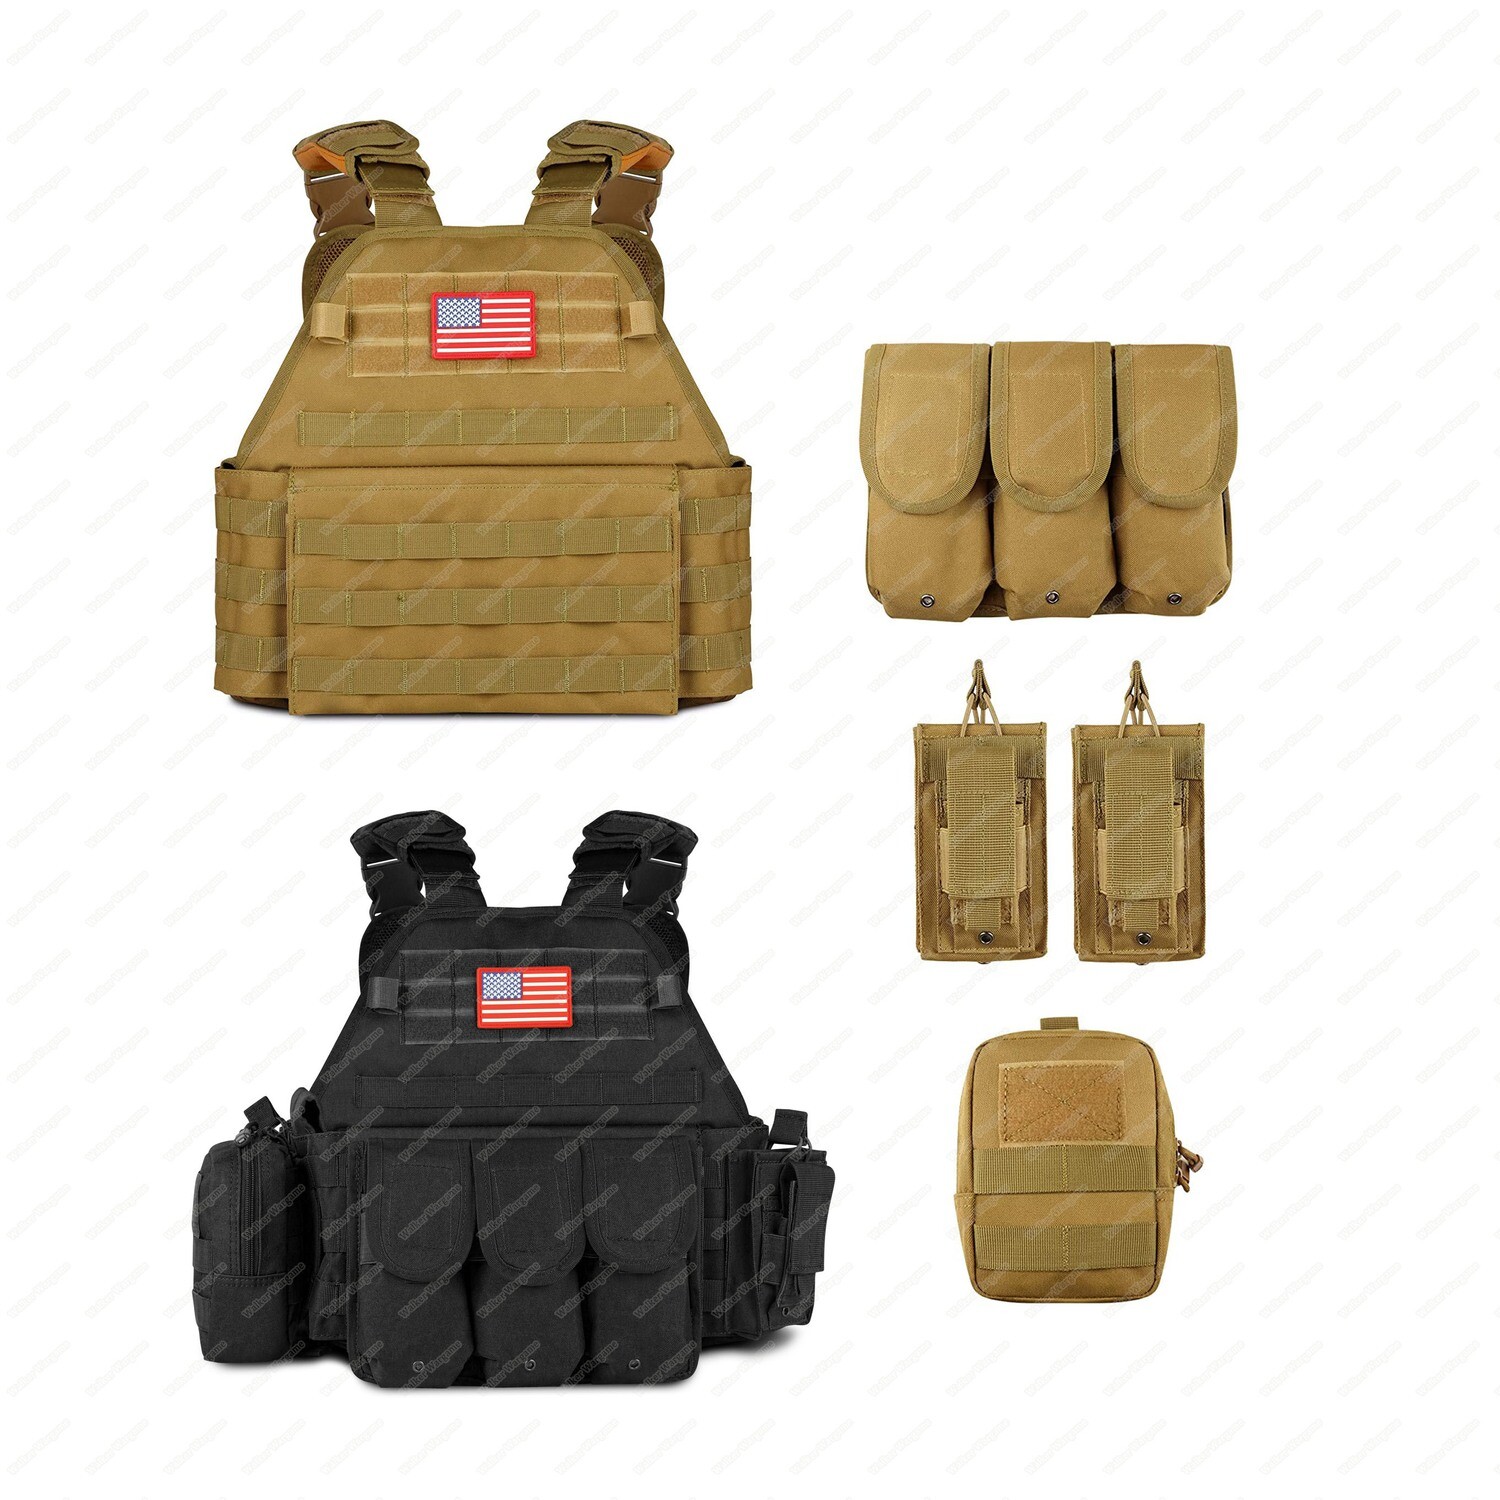 Obemisk Tactical Molle Vest With Pouch Black & Tan